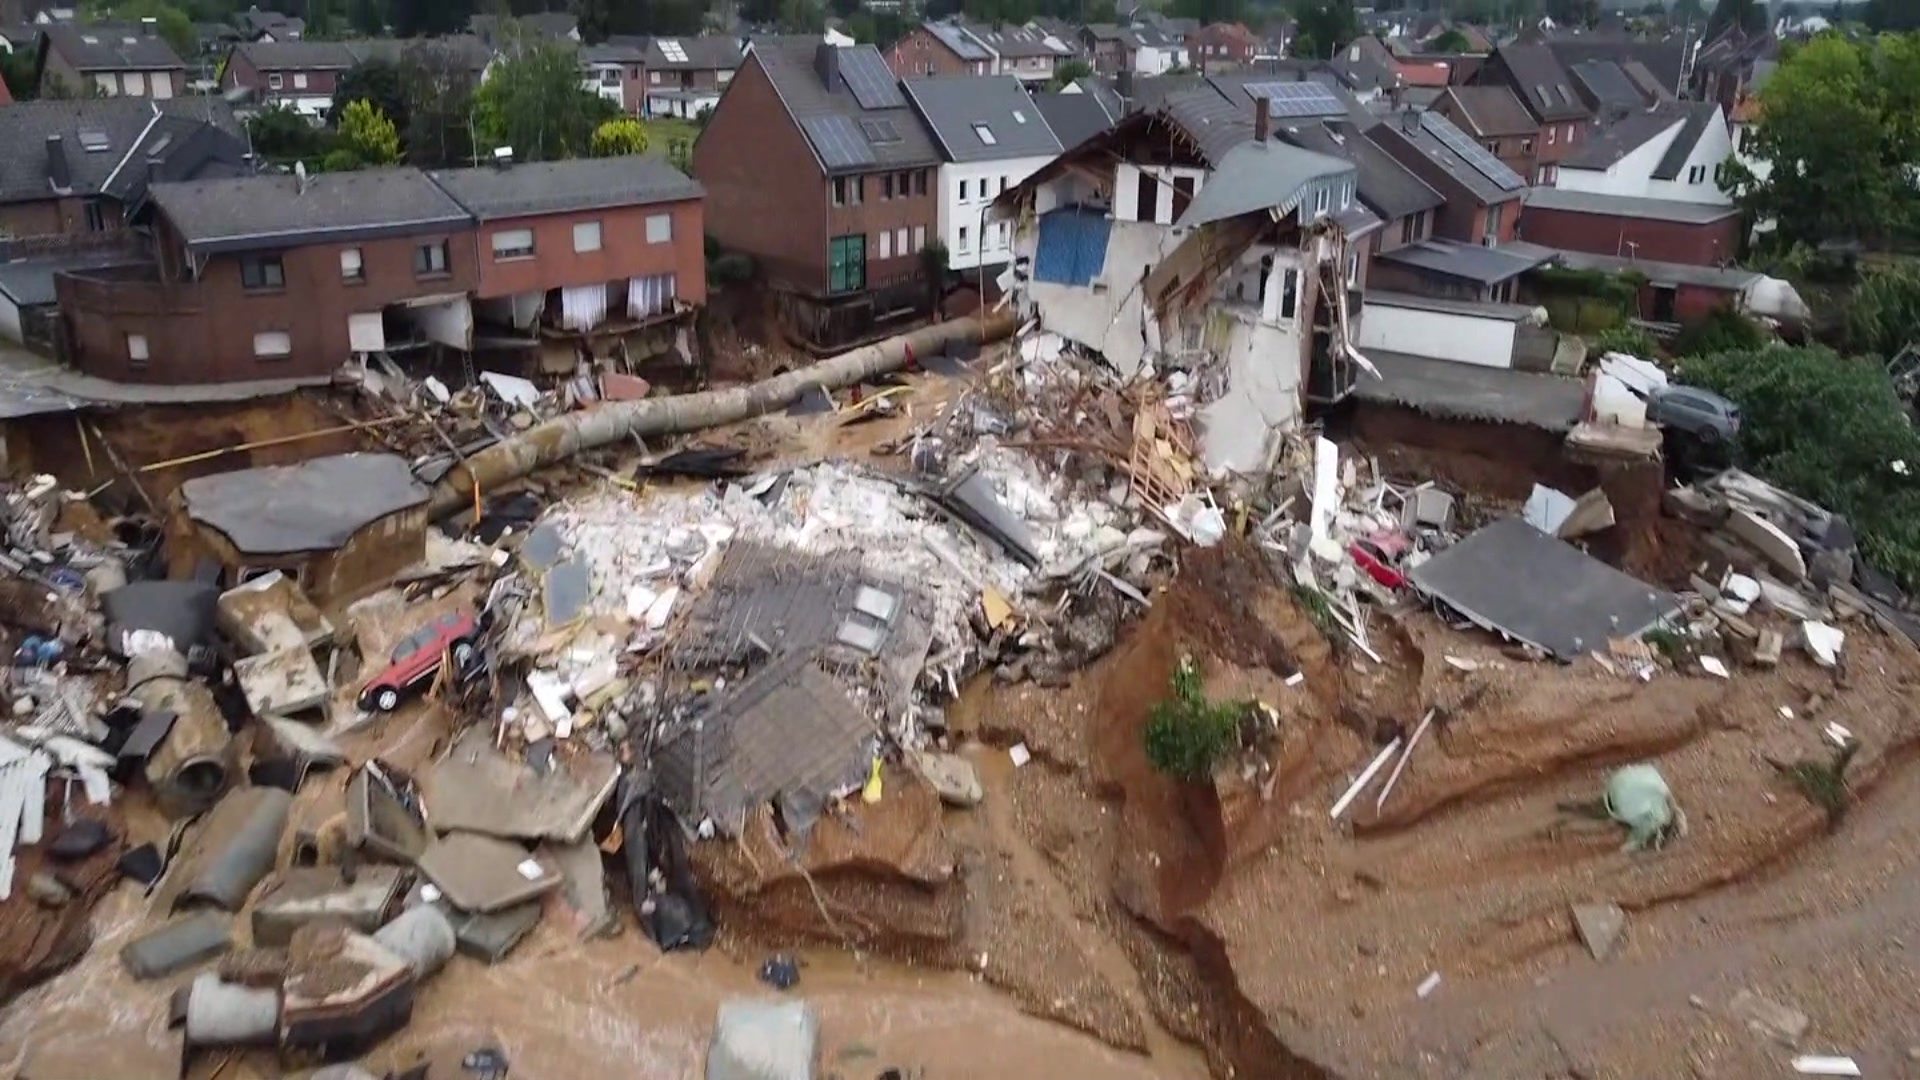 Drone footage shows mudslides in western Germany